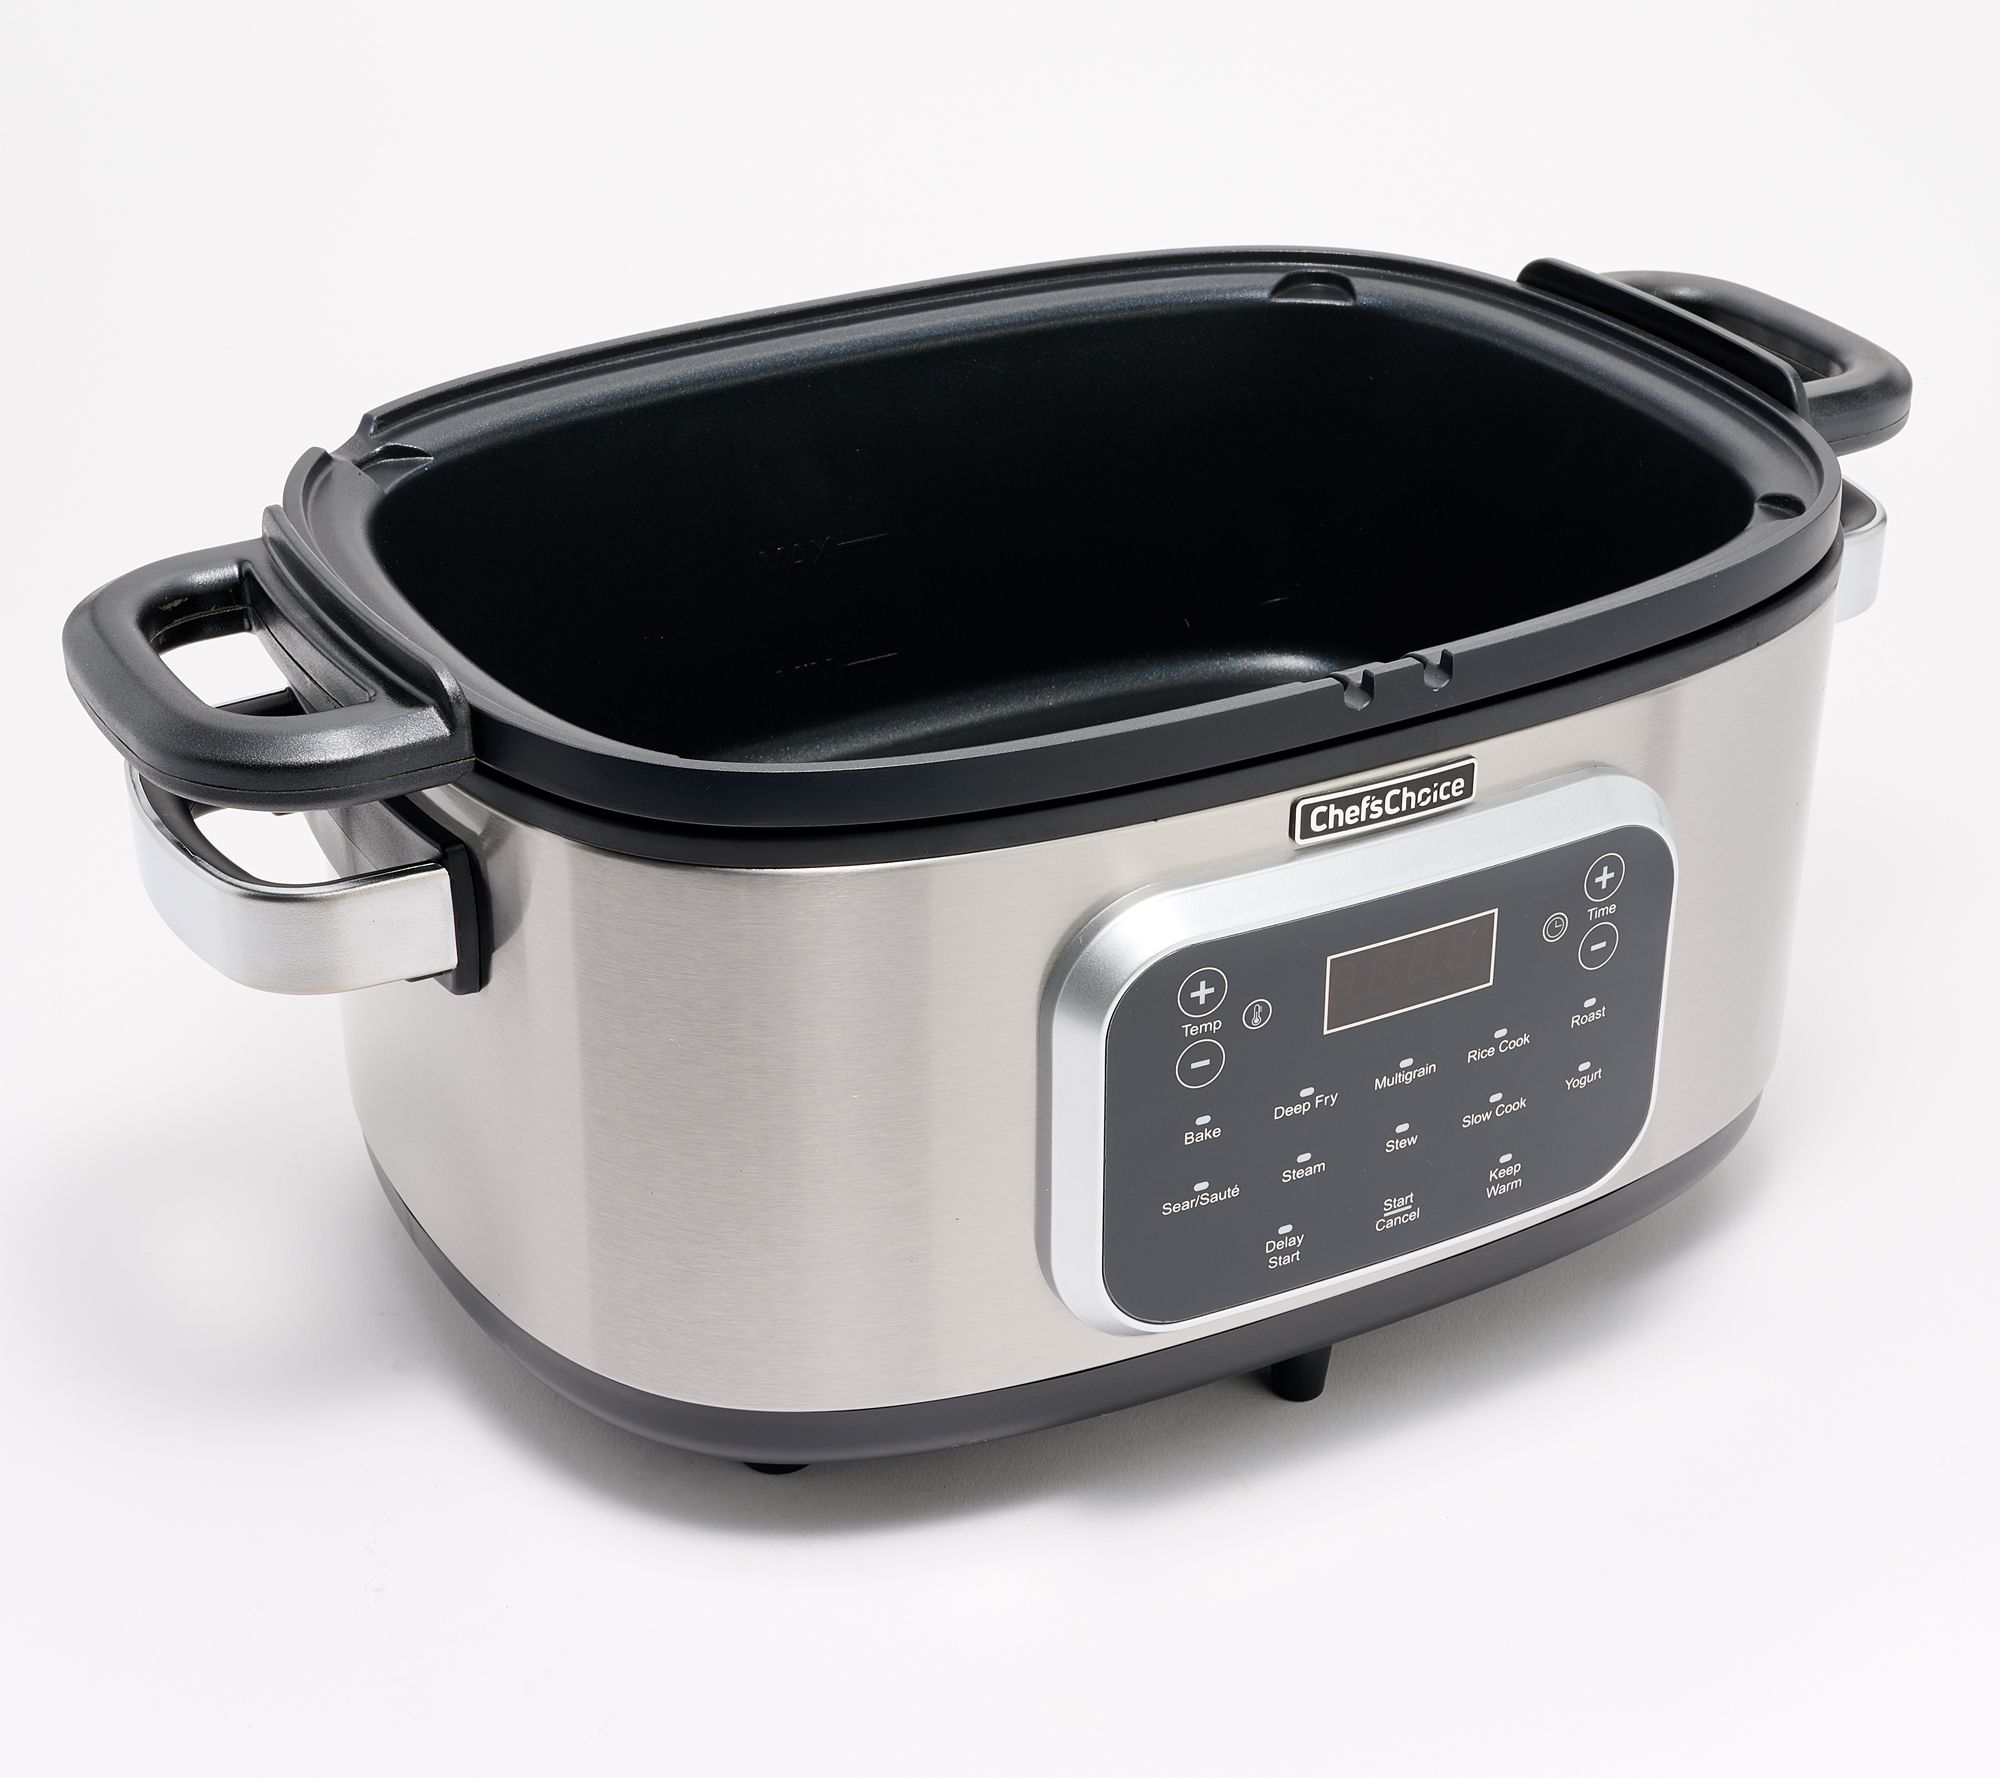 MAGIC CHEF All-in-One Multi-Cooker - Silver, 6 qt - Pay Less Super Markets